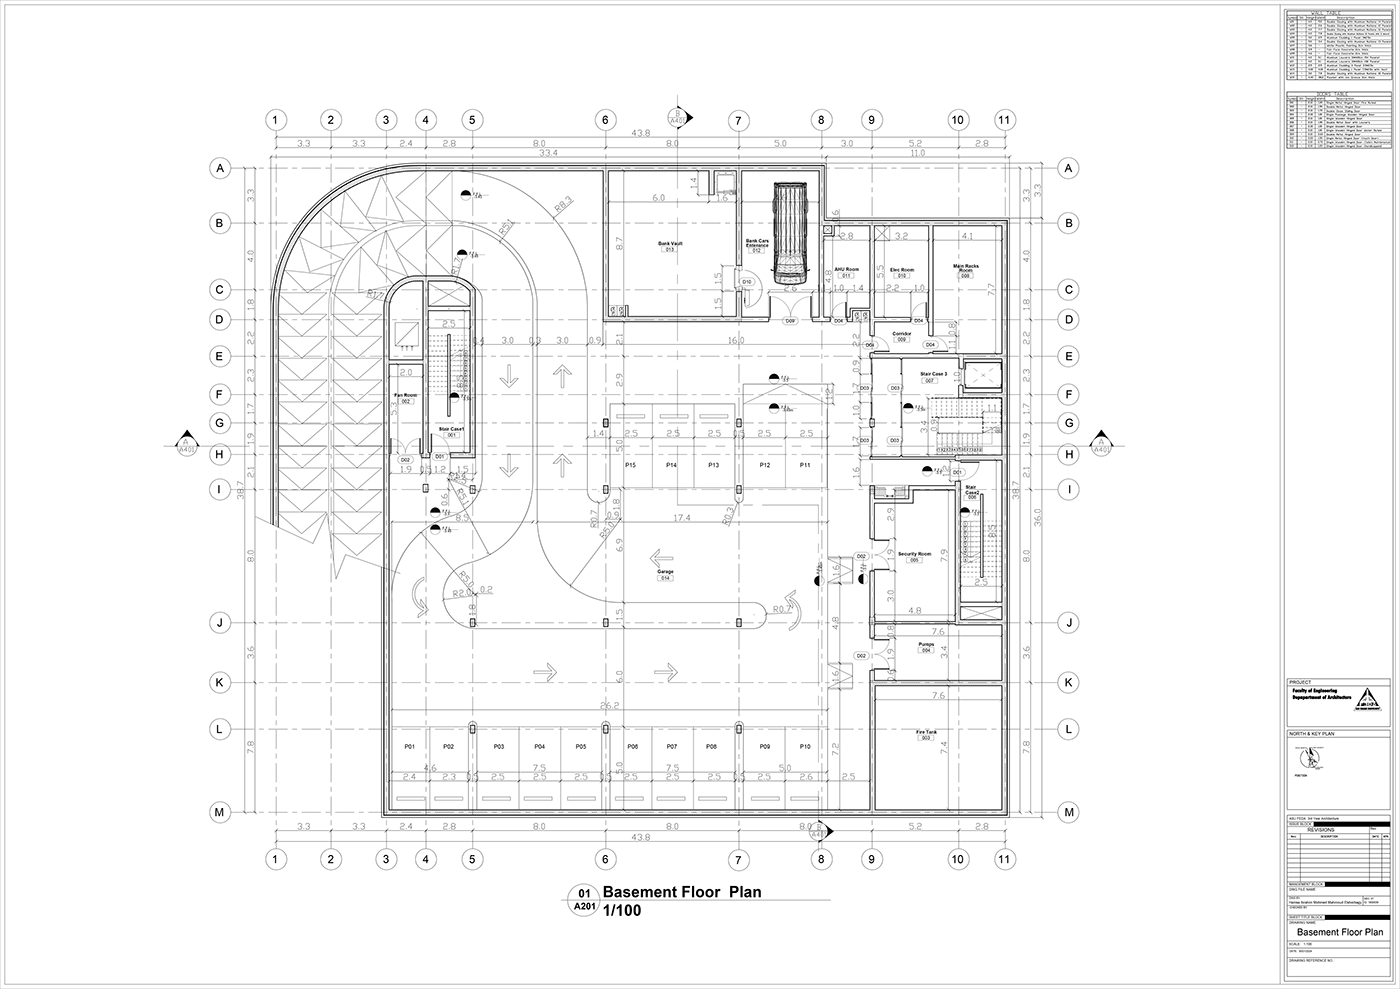 working drawings revit interior design  Bank shopdrawing architecture Smart Office